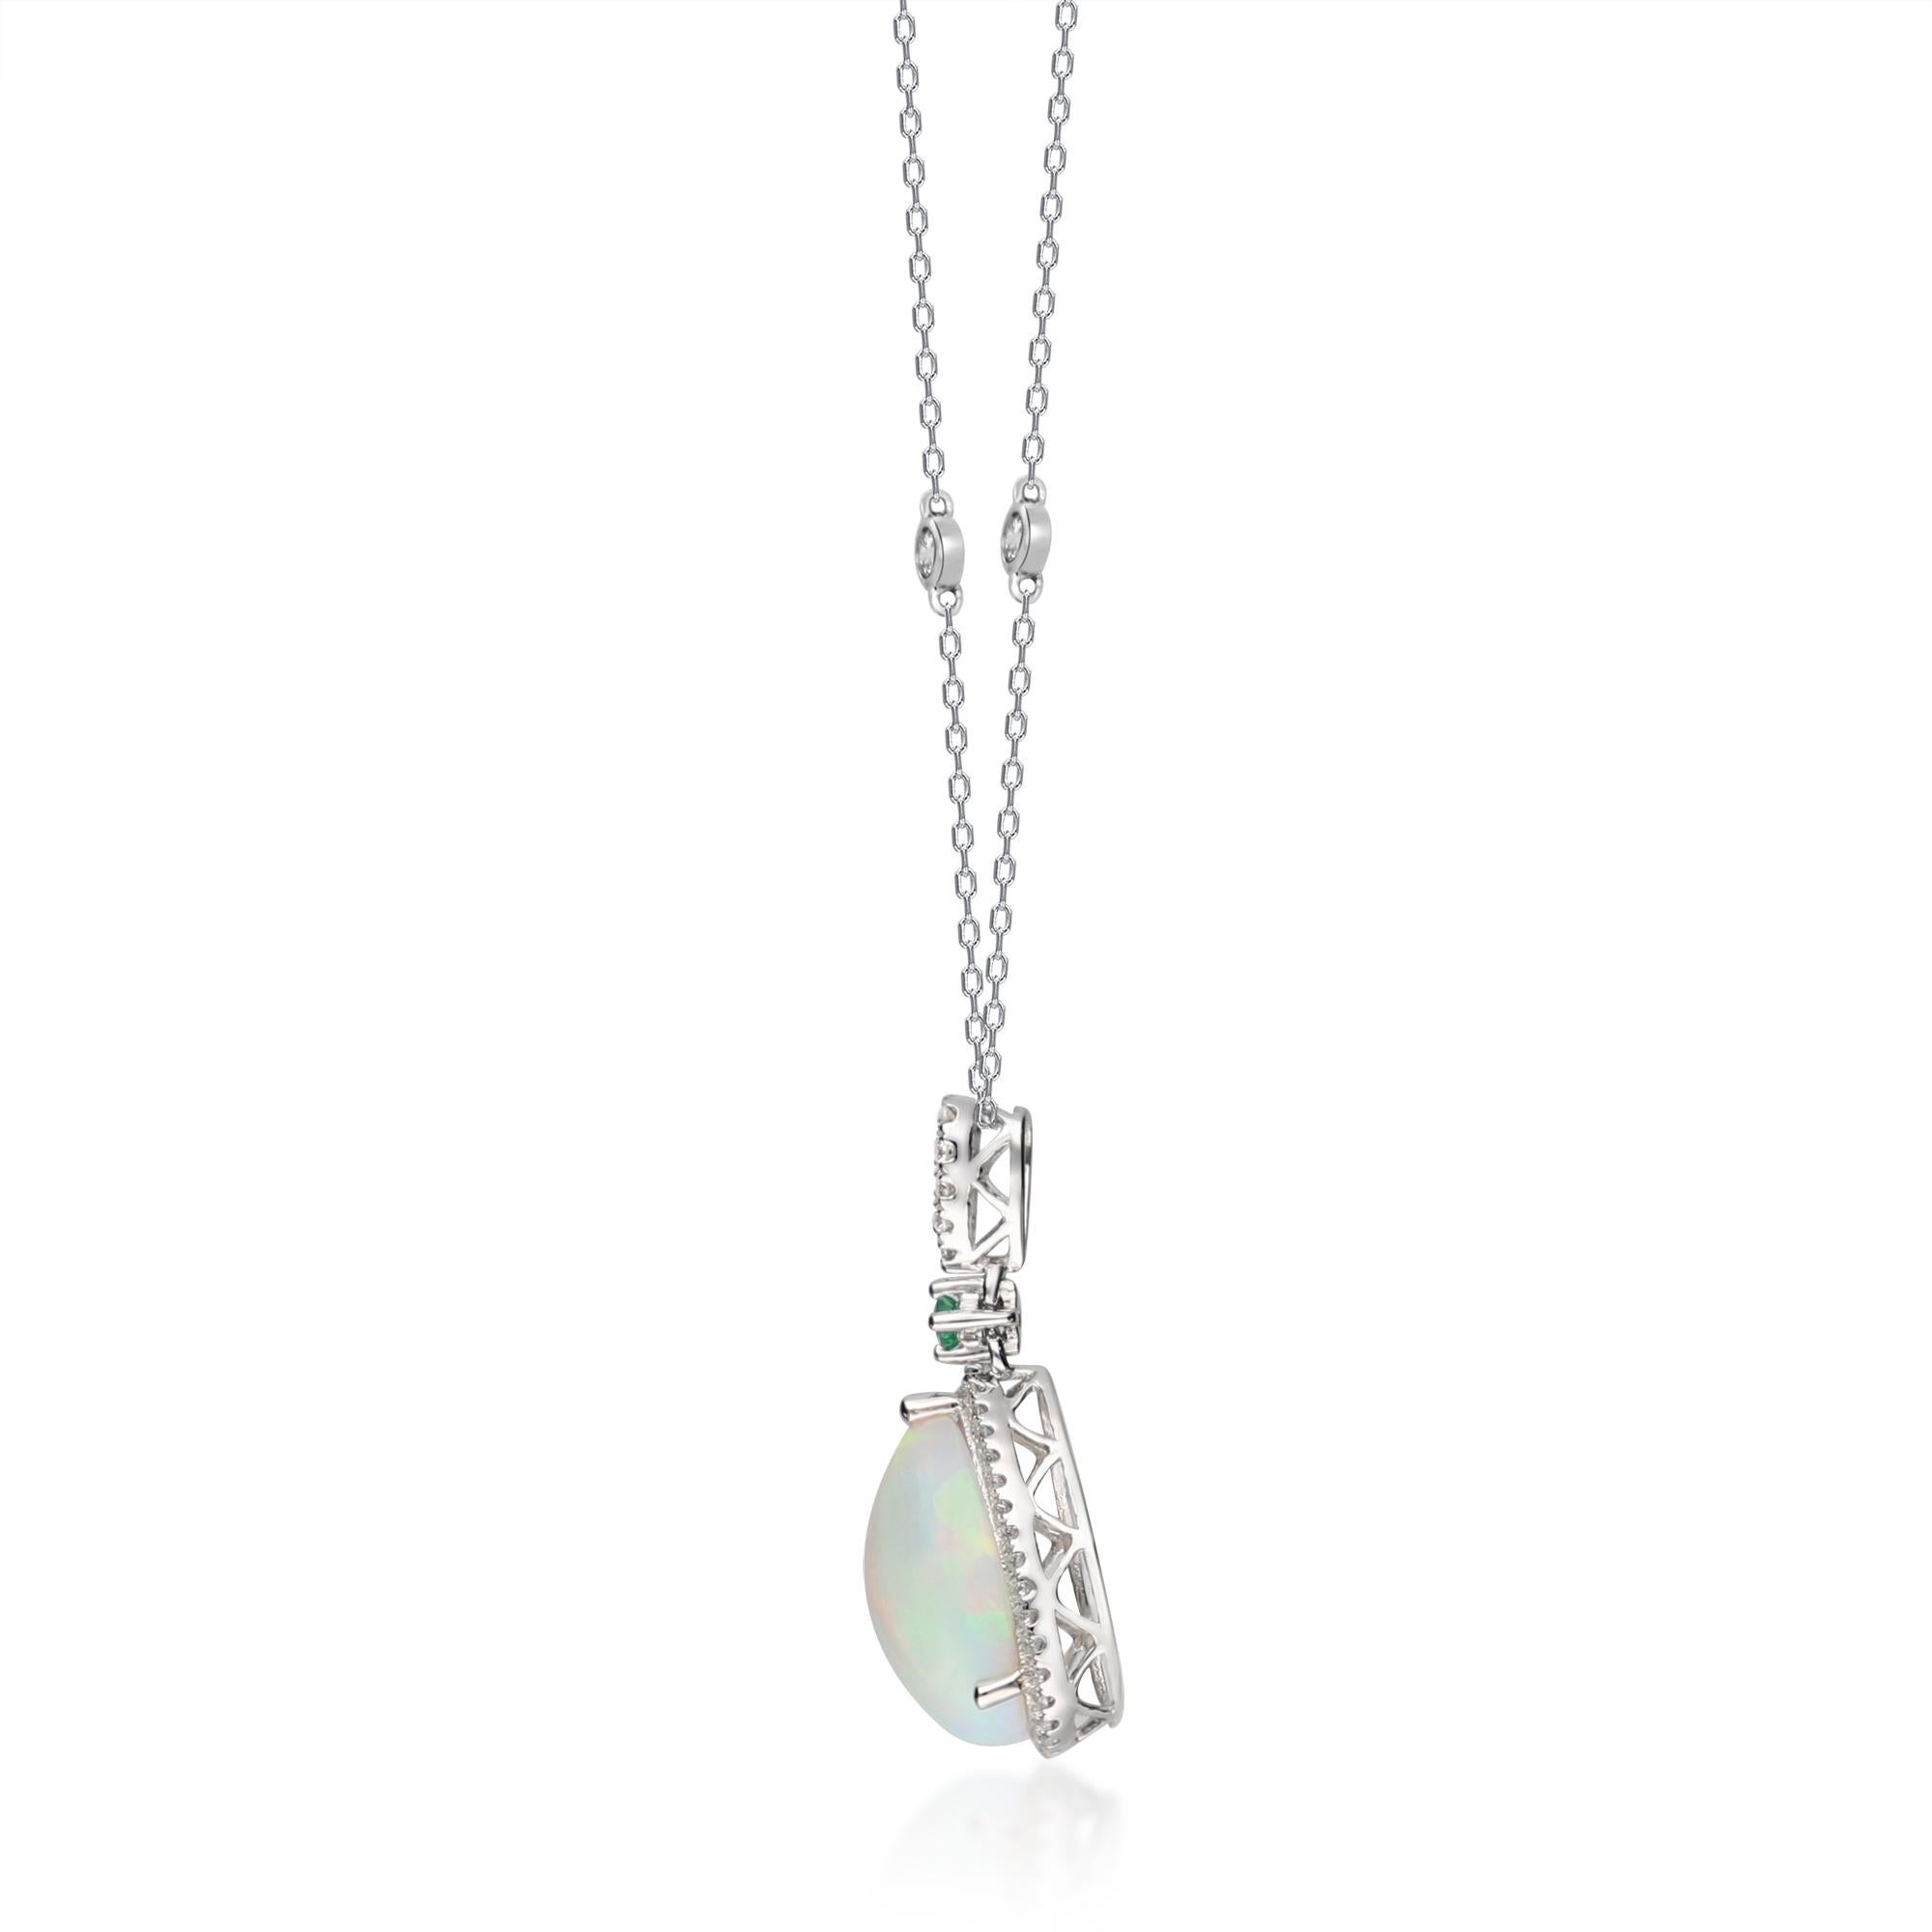 This magnificent opal Pendant is crafted in 14-karat white gold and features a pear shaped 2.62 carat Ethiopian Opal, 0.05 carat Round cut emerald and 49 Round Diamonds in GH- I1 quality with 0.37 ct. in a prong-setting. 
This pendant comes with 18